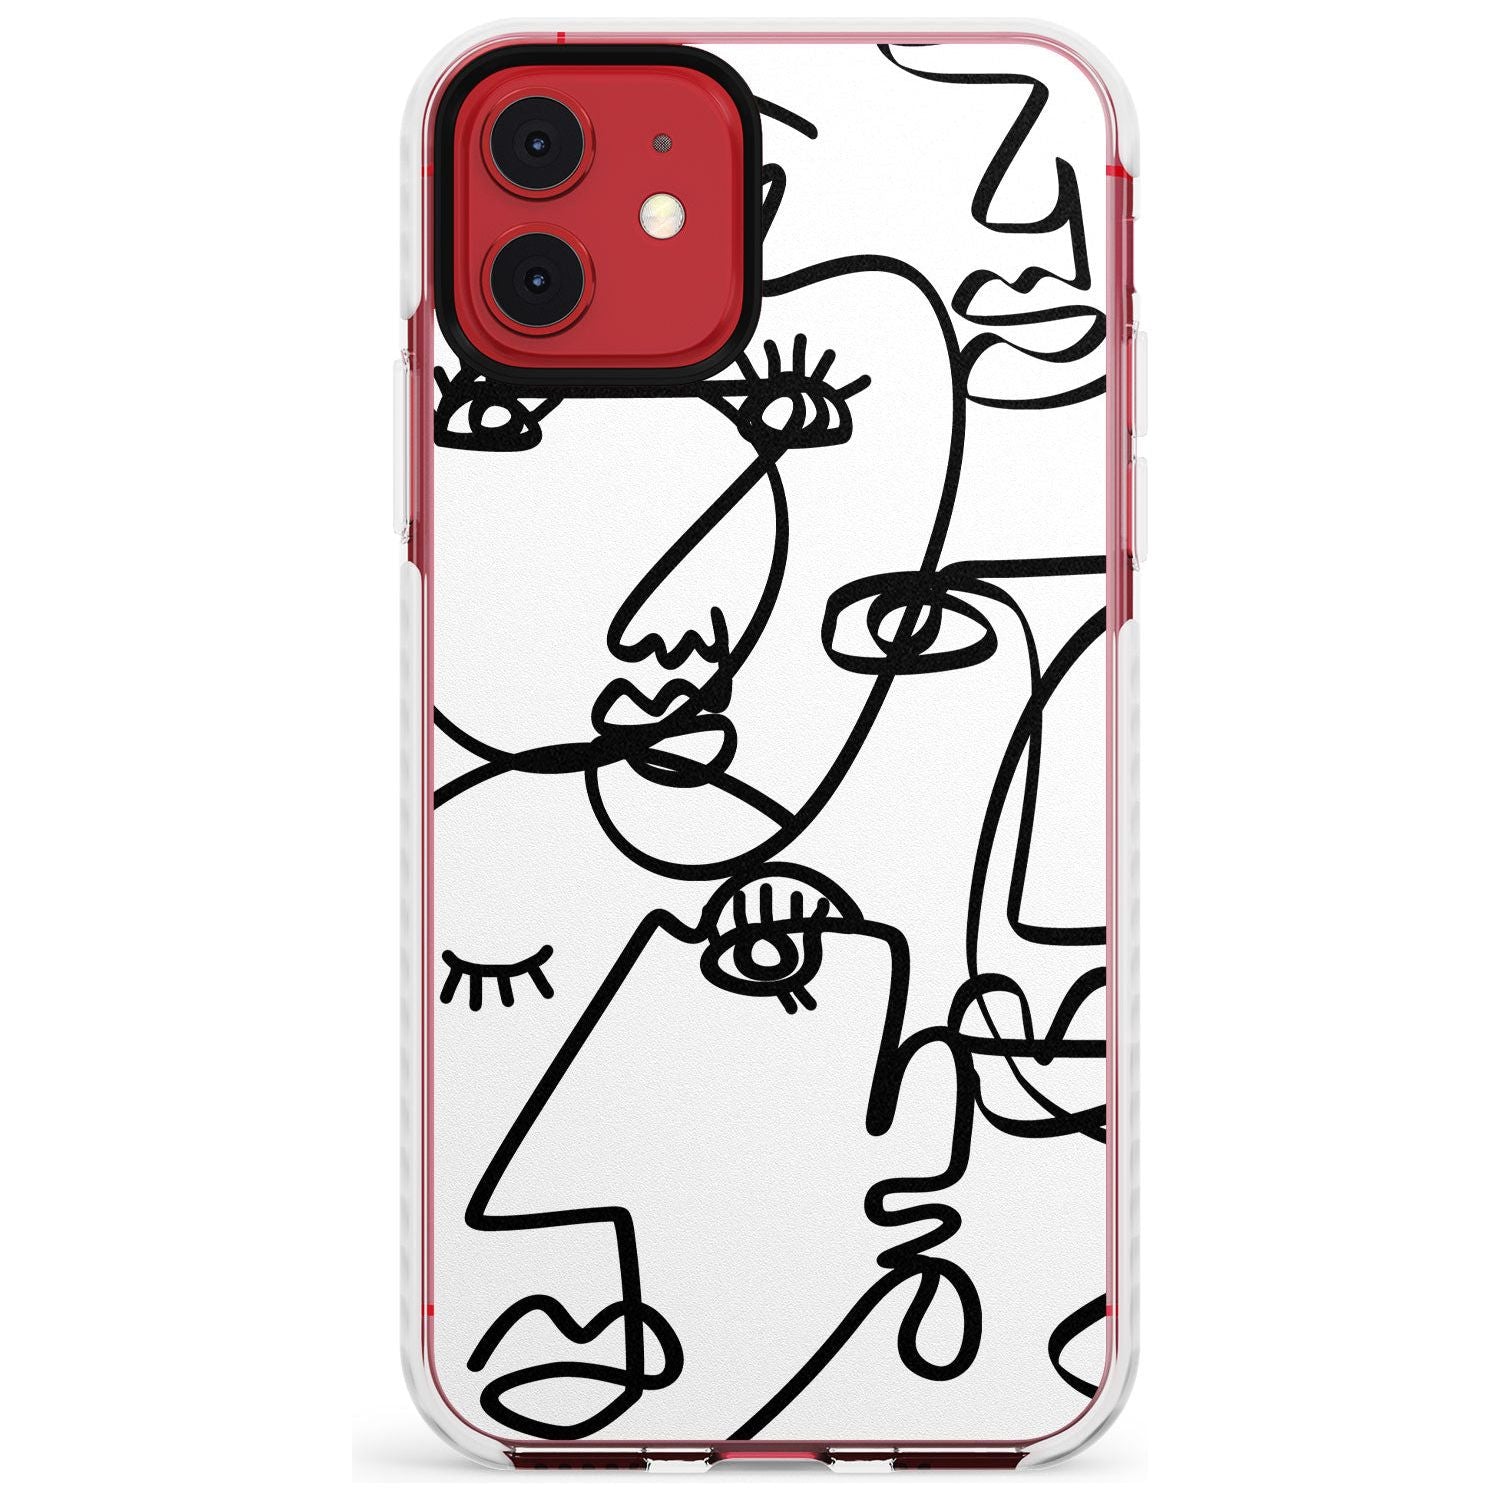 Continuous Line Faces: Black on White Slim TPU Phone Case for iPhone 11